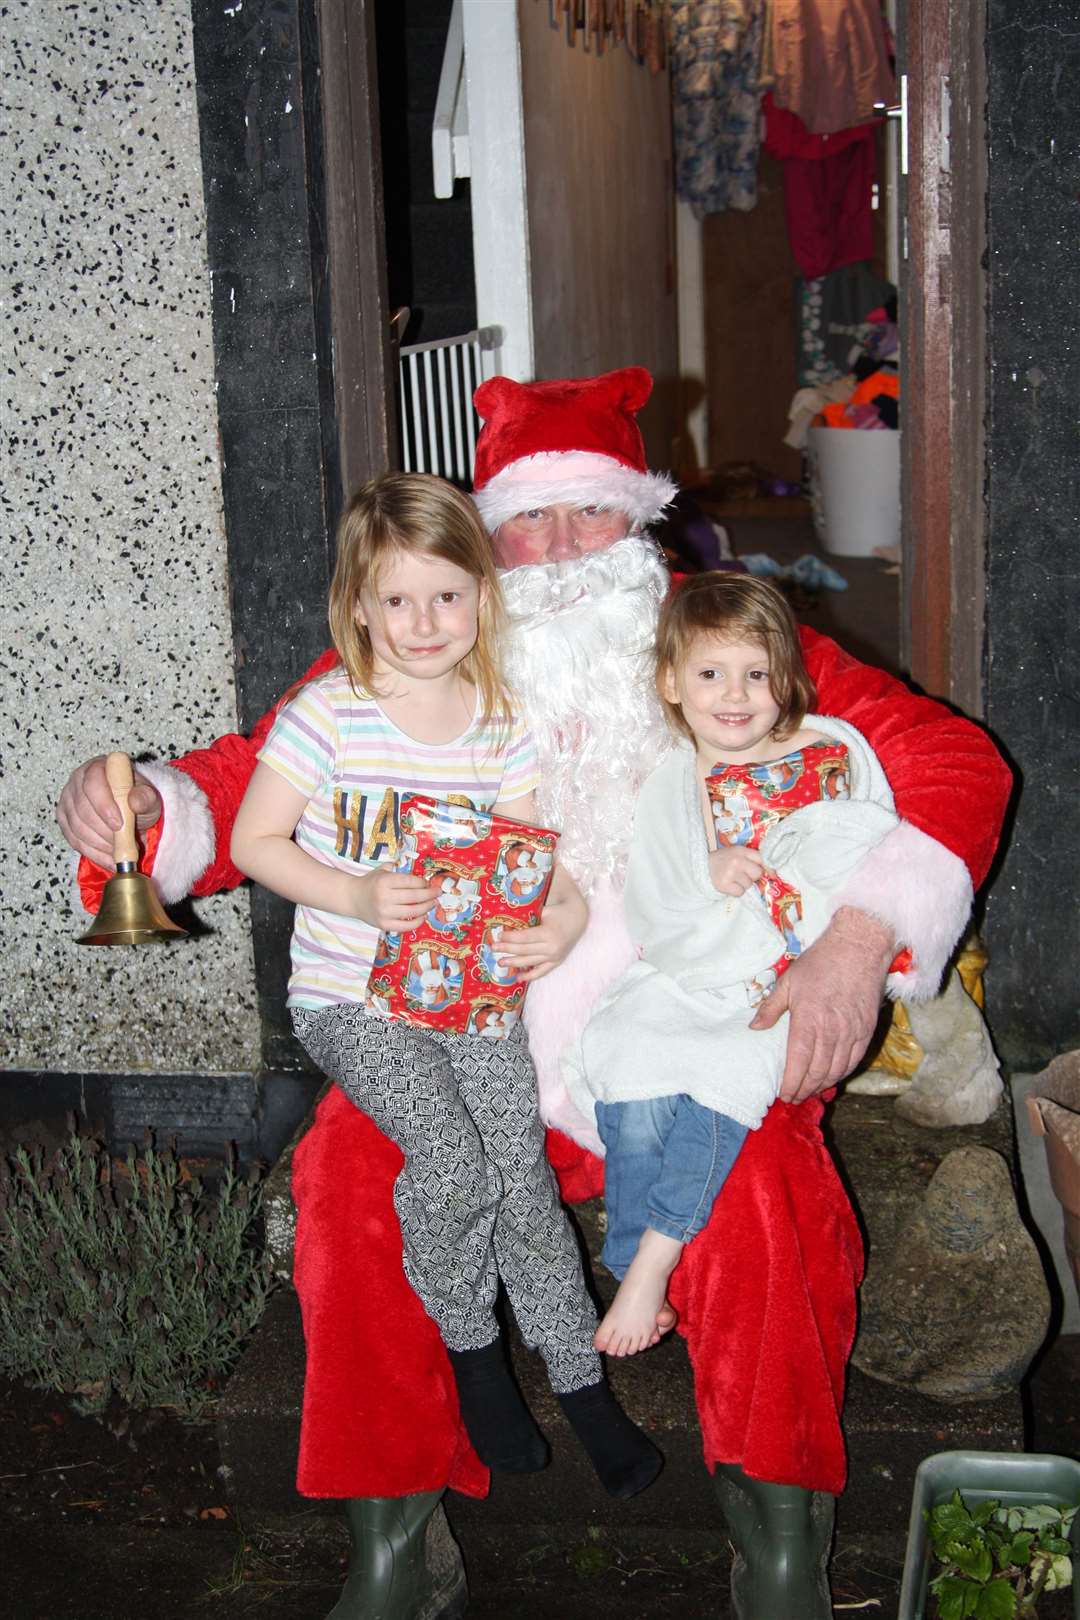 Ting-a-ling - Santa announced his presence with his hand bell. Young Elsie and Maggie Mcnicol were thrilled to receive gifts from Santa.